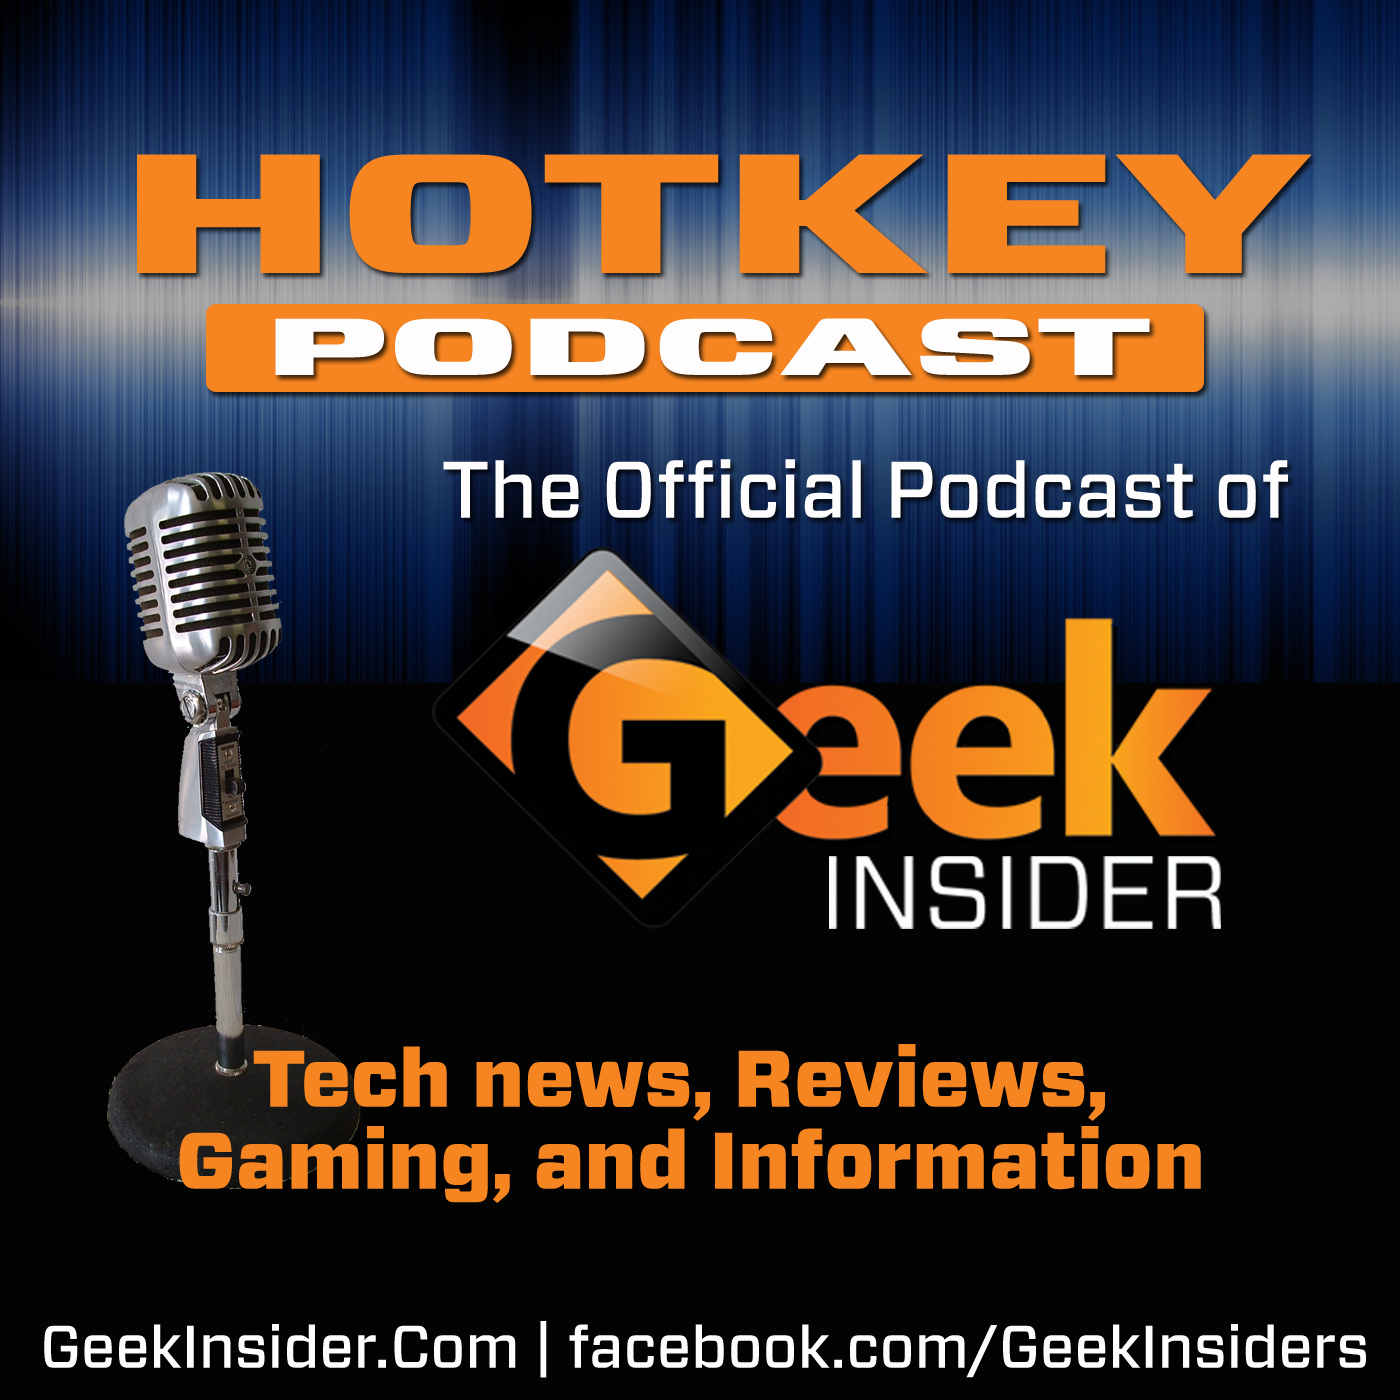 Geek insider, geekinsider, geekinsider. Com,, hotkey: the official podcast of geek insider #1 - 08. 14. 13, podcasts